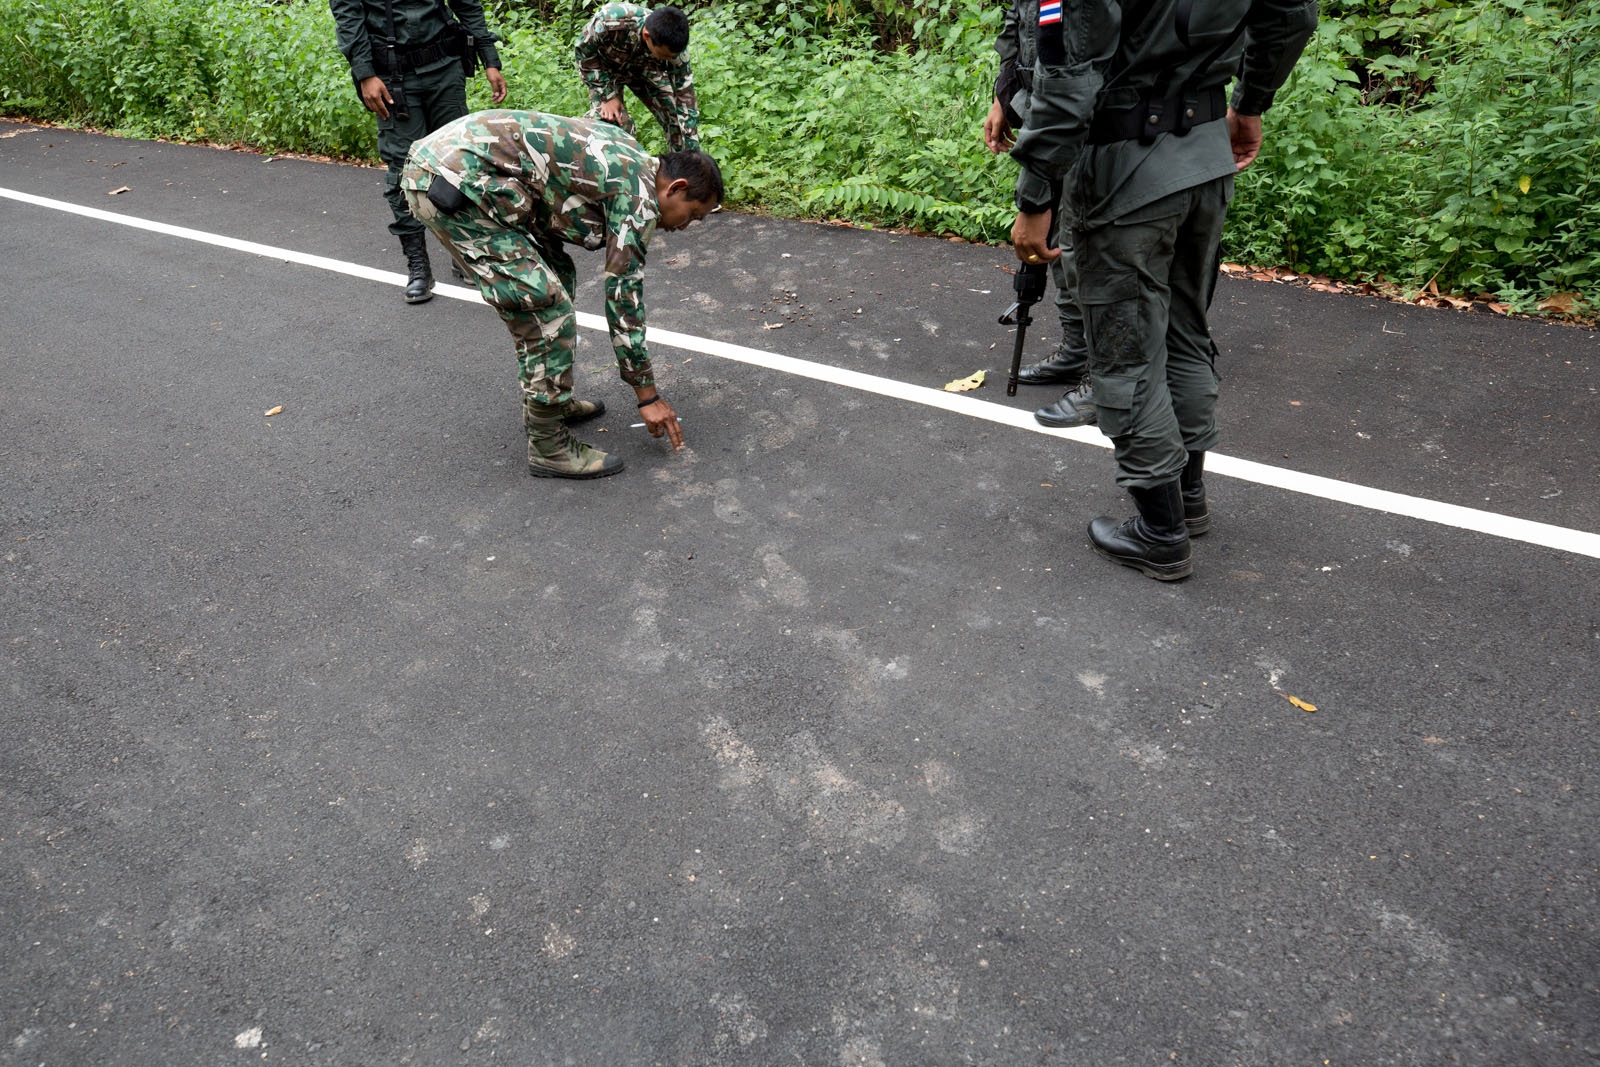 PROTECTING THAILANDS ROSEWOOD - Thai forest rangers and border patrol police inspect...